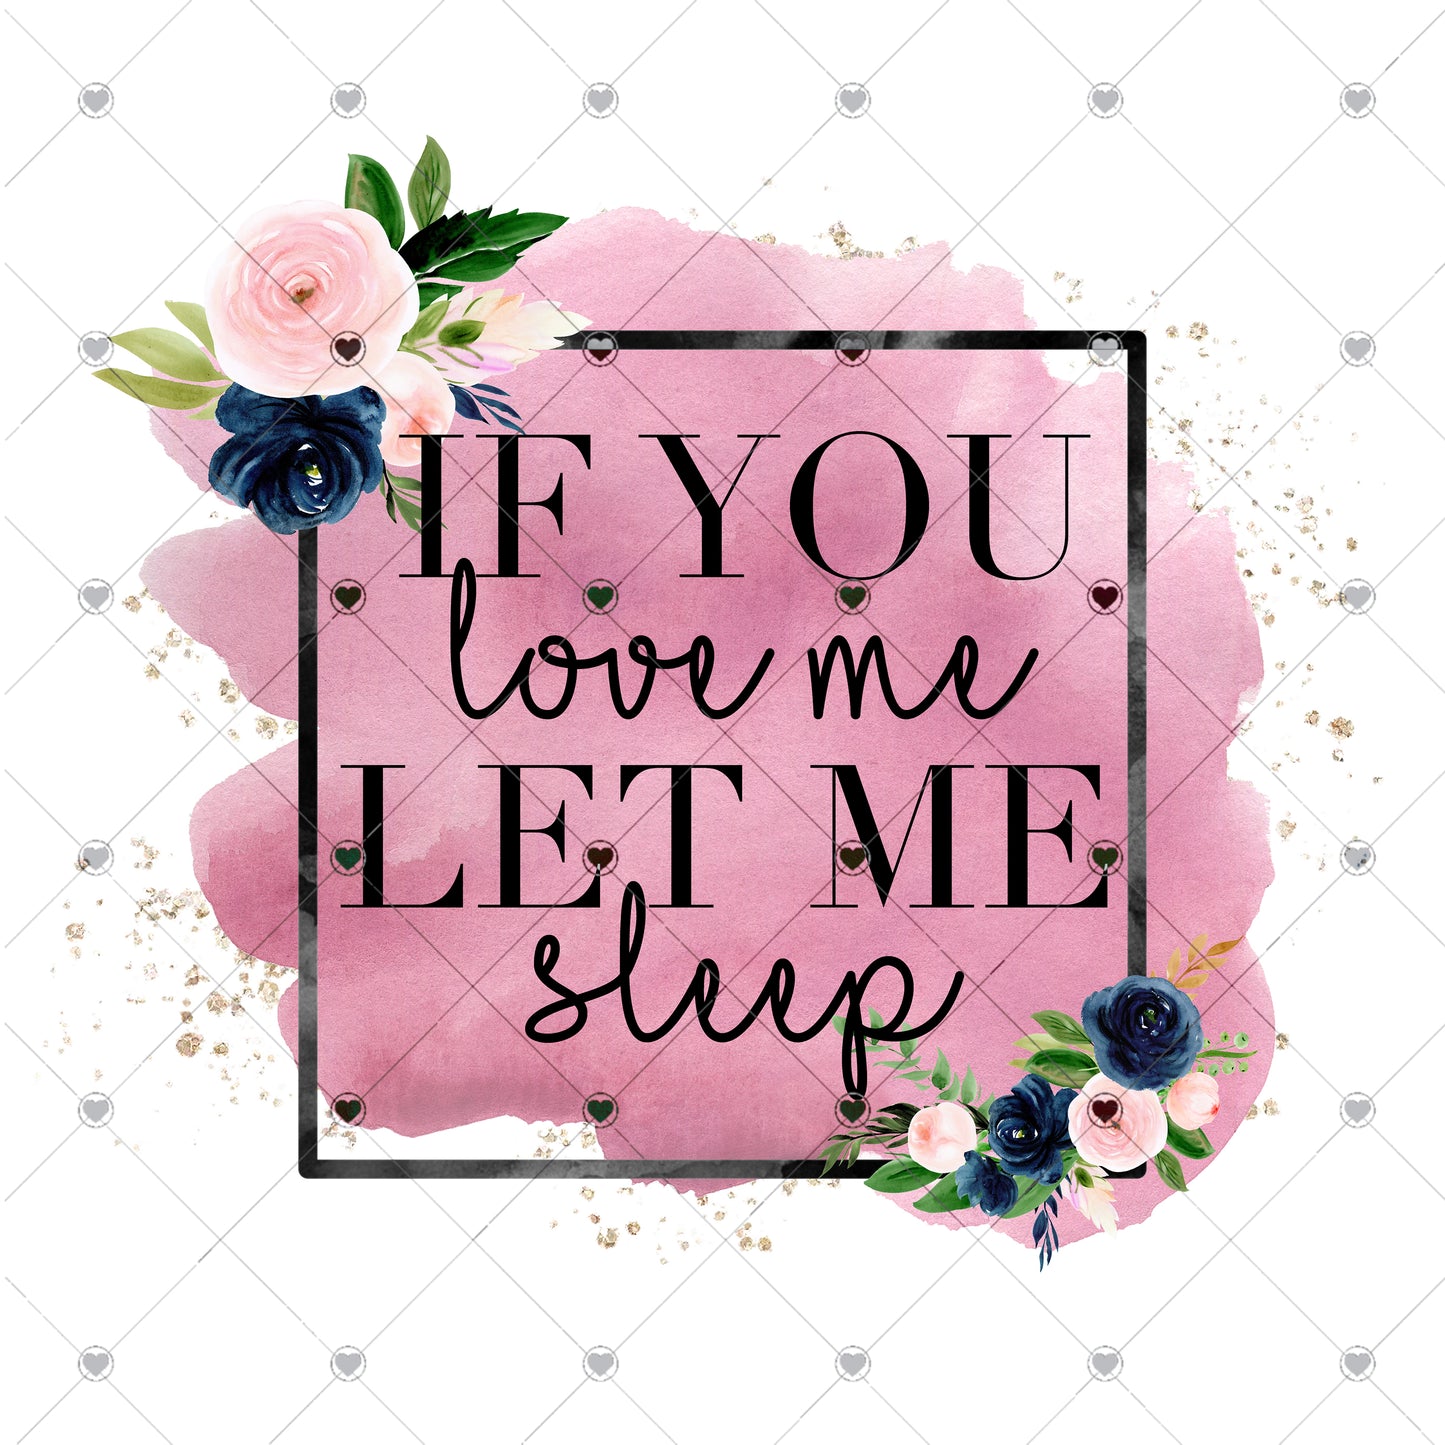 If You Love Me Let Me Sleep Ready To Press Sublimation Transfer